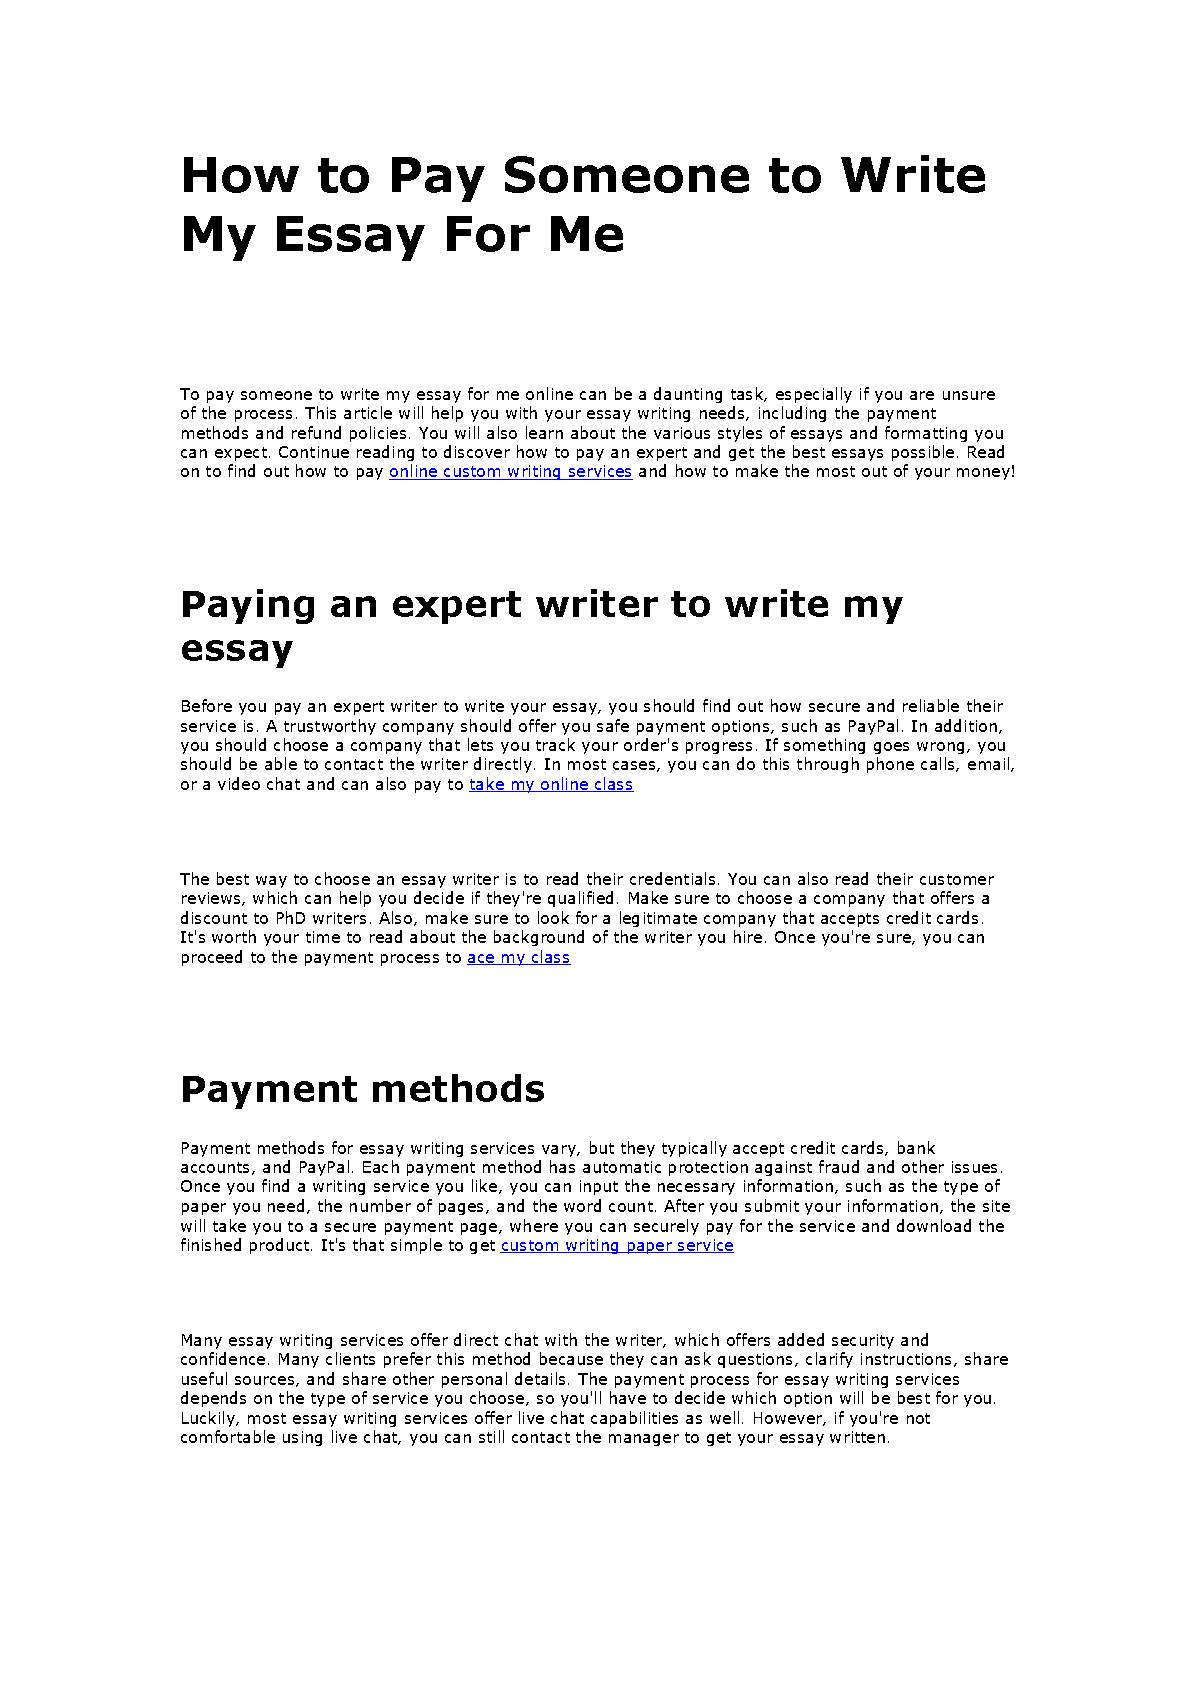 pay someone to write an essay for me